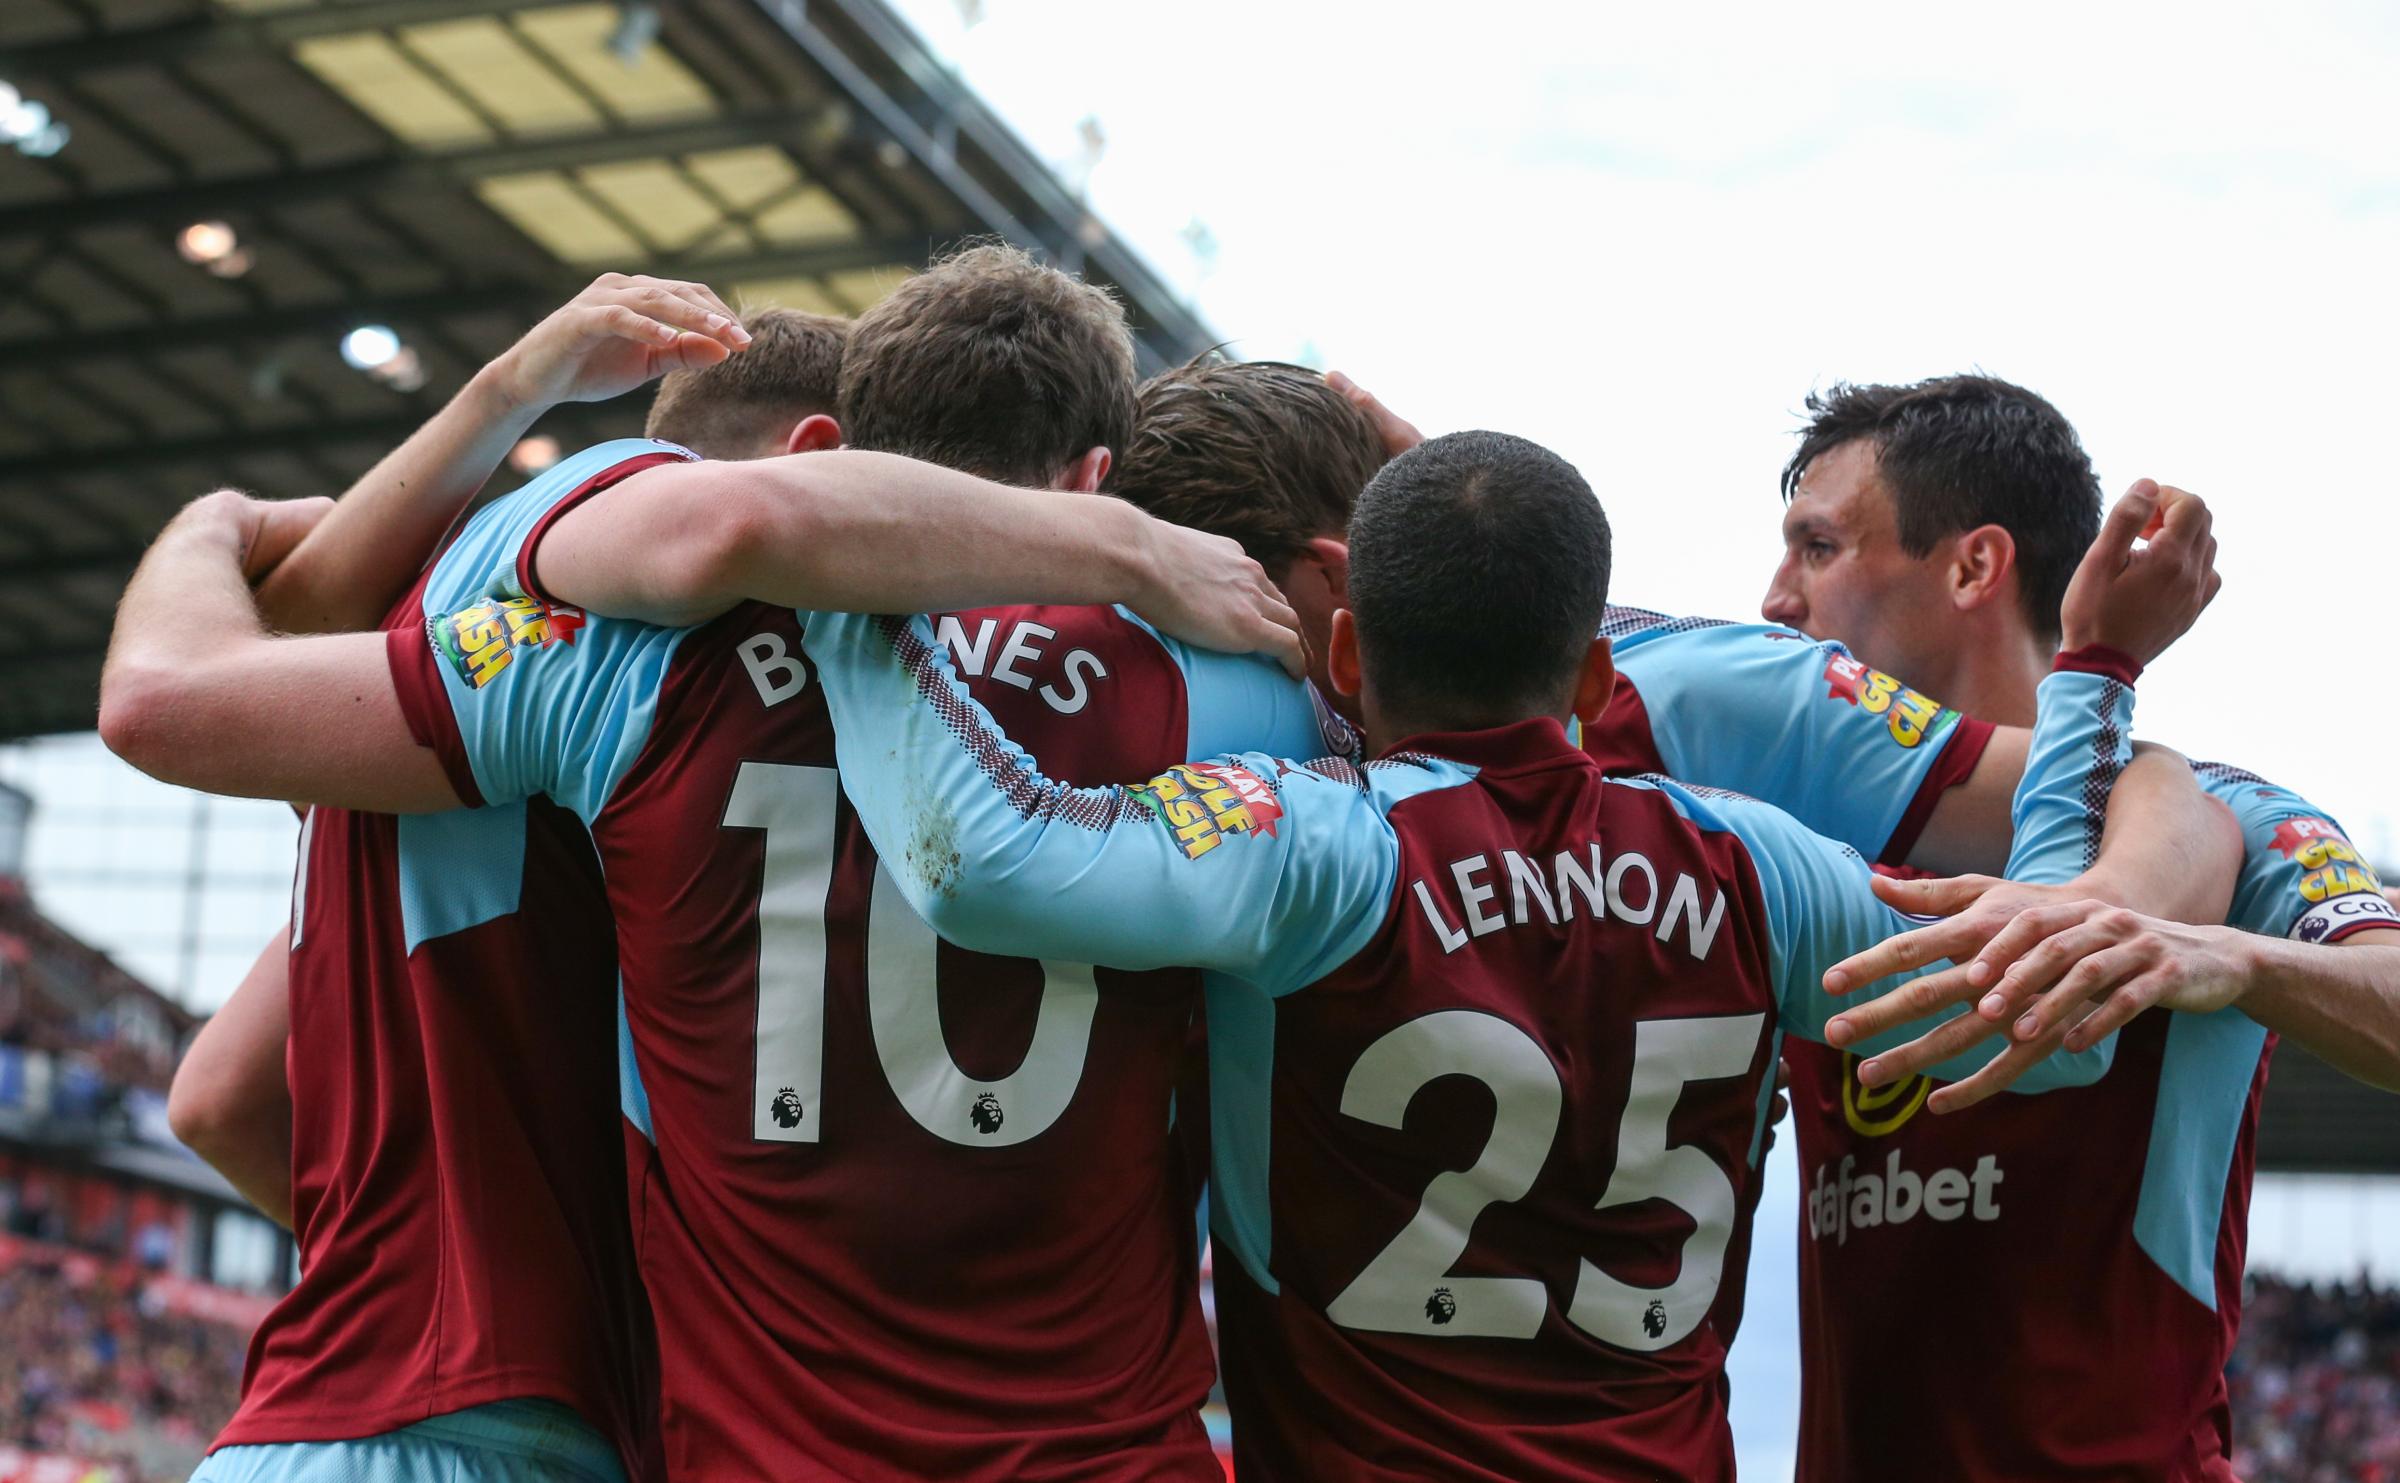 Burnley S Likely Europa League Entry Point Confirmed Lancashire Telegraph